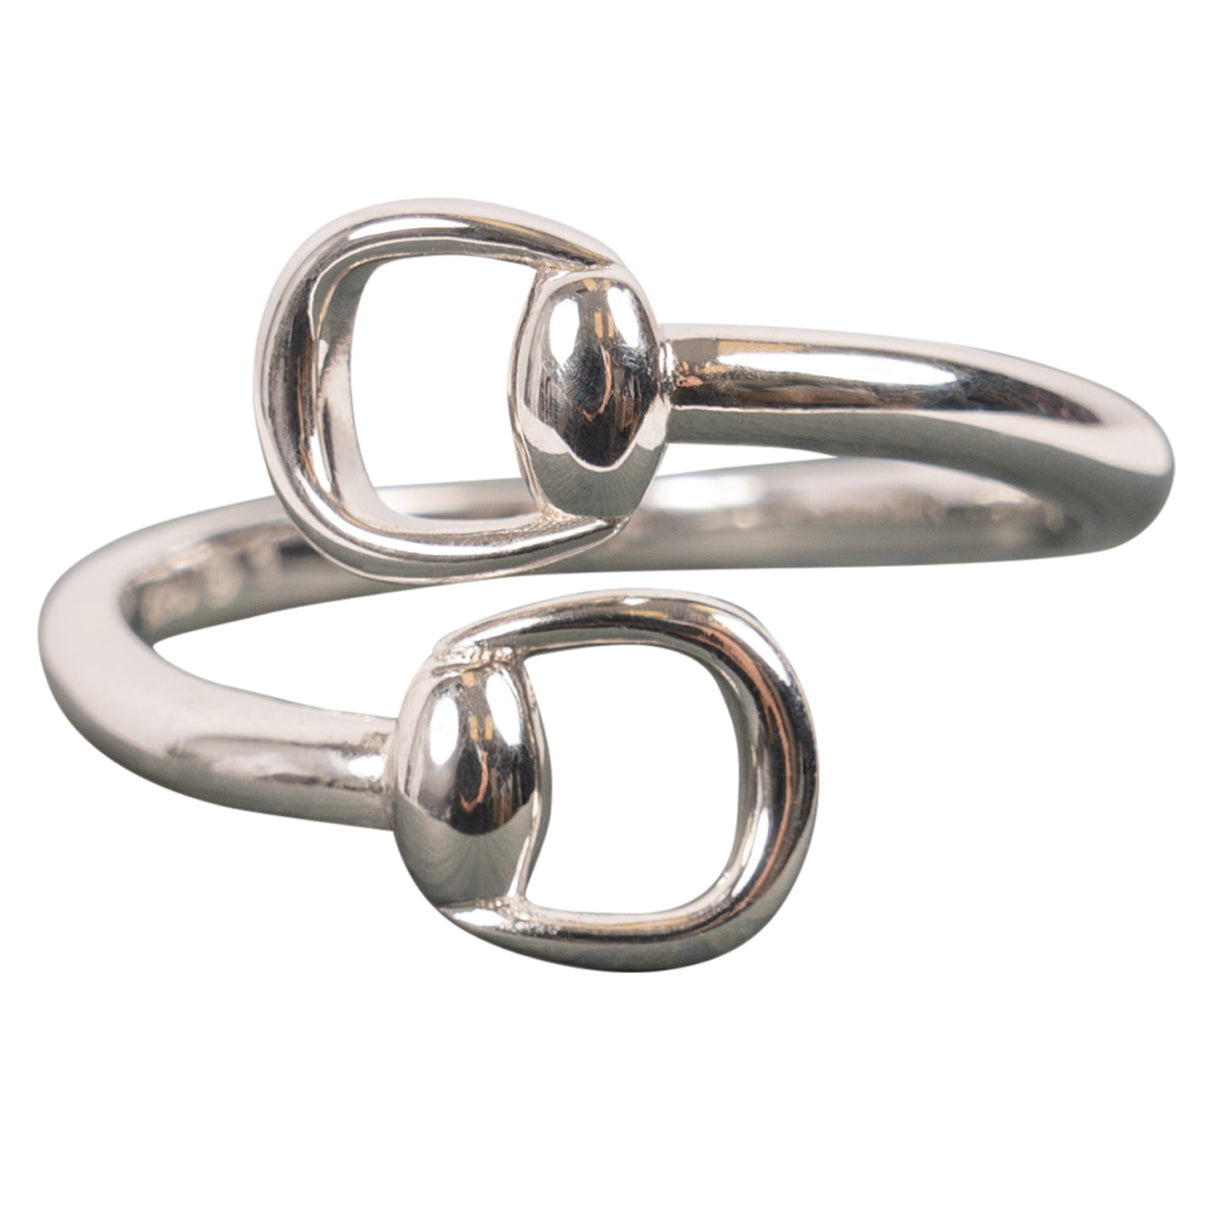 Cinto by Kelly Herd One Size Adjustable Bit Ring